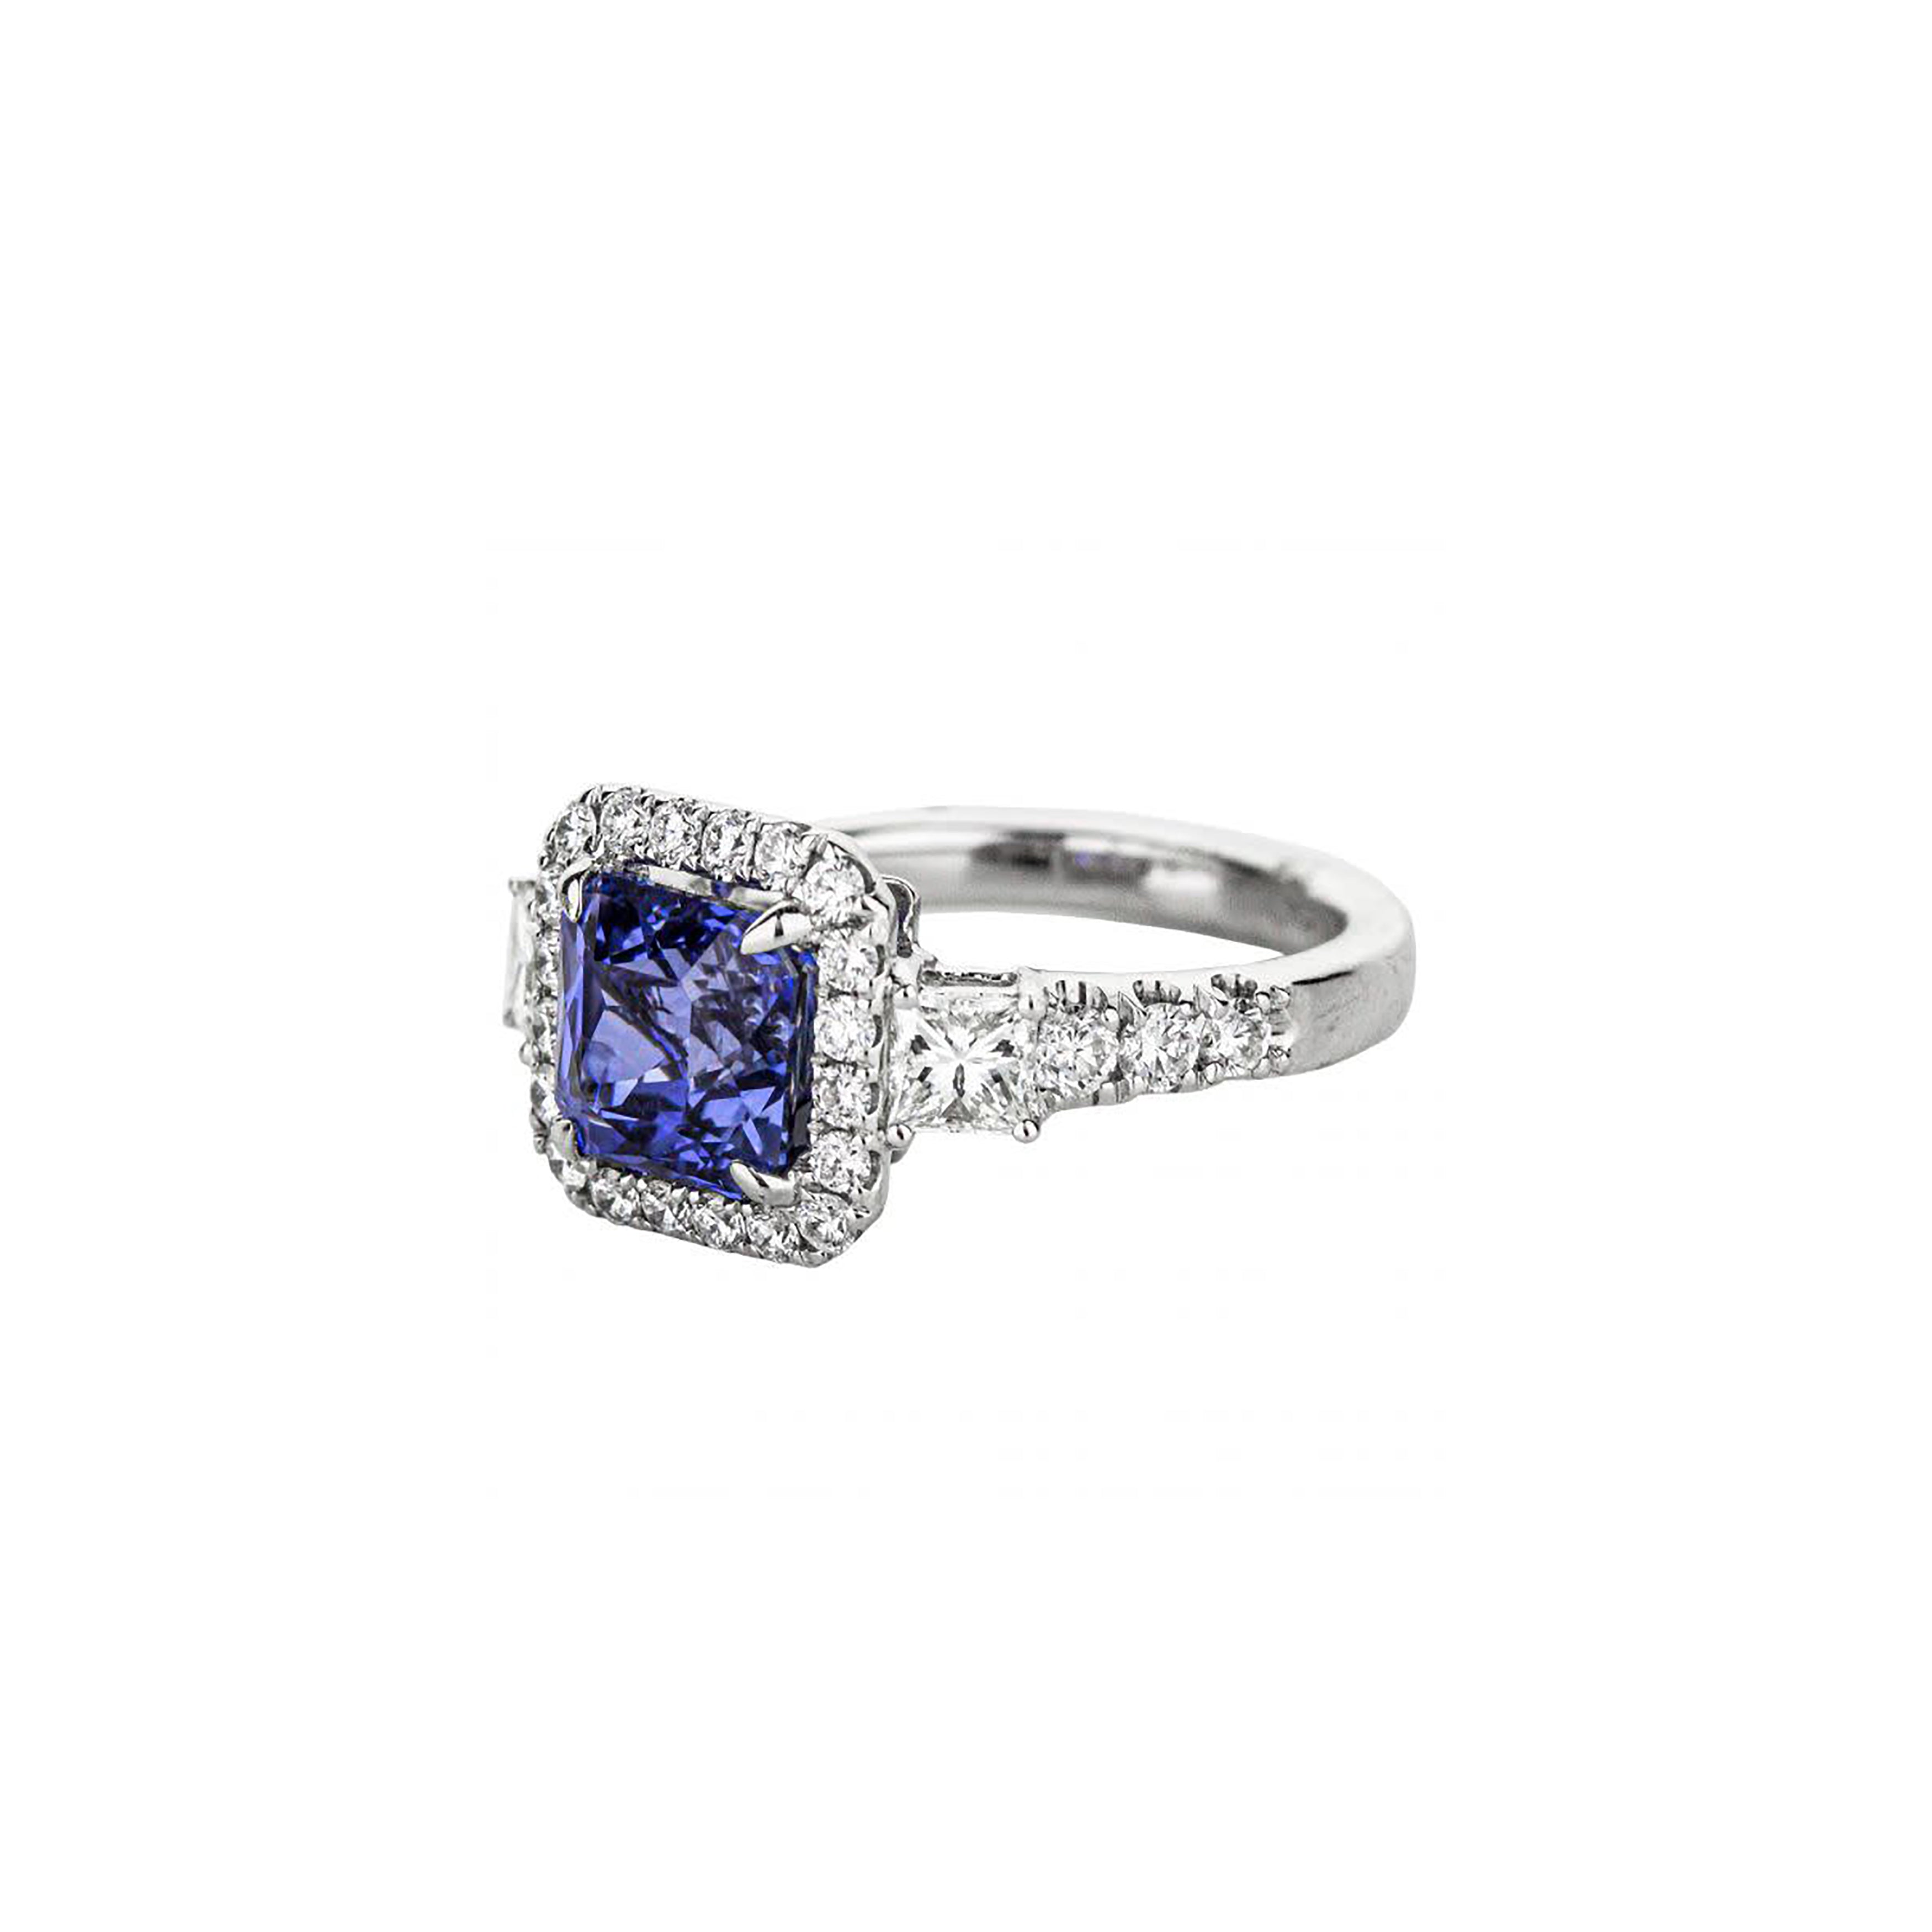 18K White Gold Radiant-Cut Blue Sapphire With Accent Princess-Cut Diamonds Ring